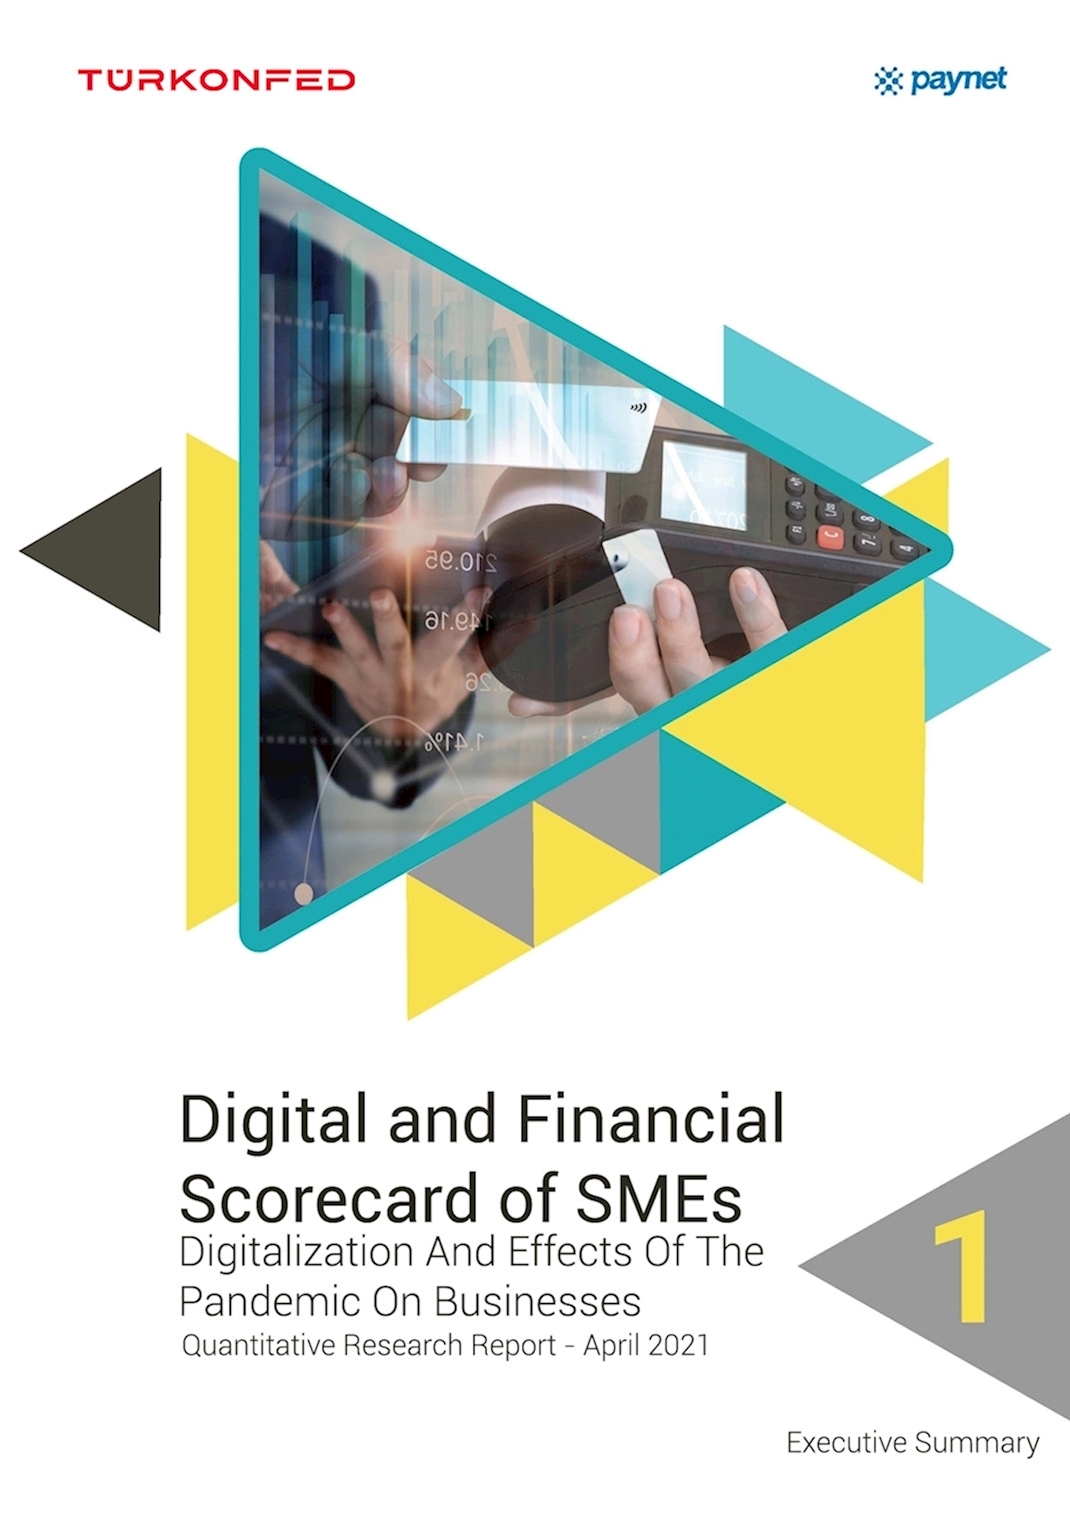  Digital And Financial Scorecards Of SMEs’ 1: Digitalization And Effects Of The Pandemic On Businesses